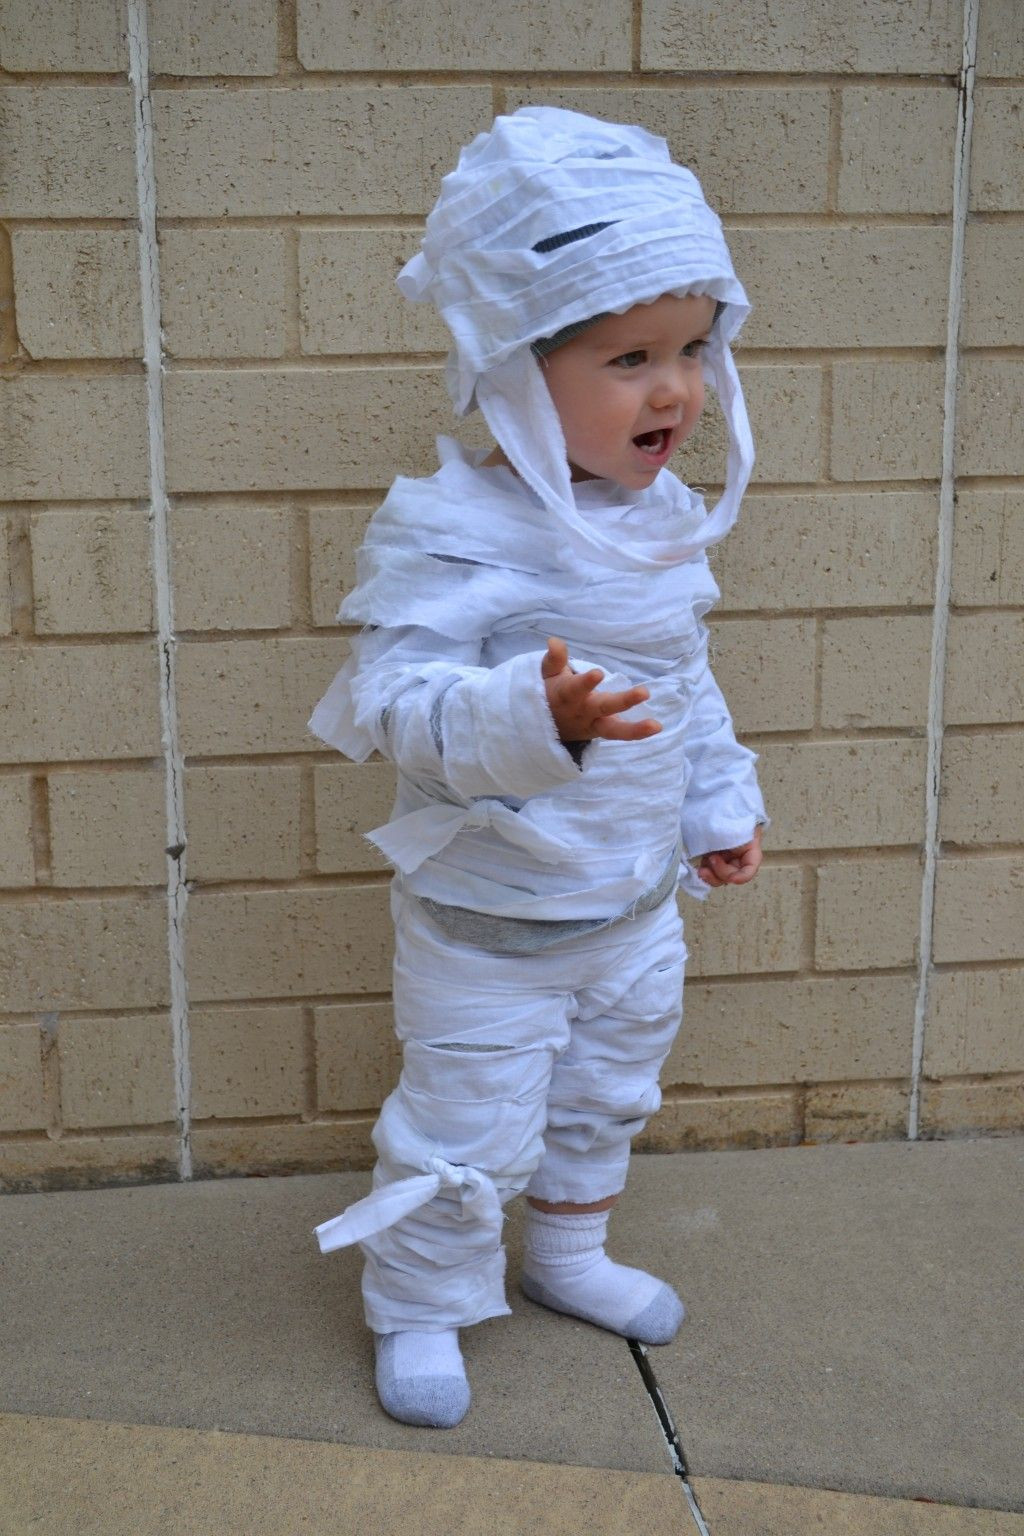 Easy DIY Costumes For Toddlers
 How To Make An Easy No Sew Child s Mummy Costume